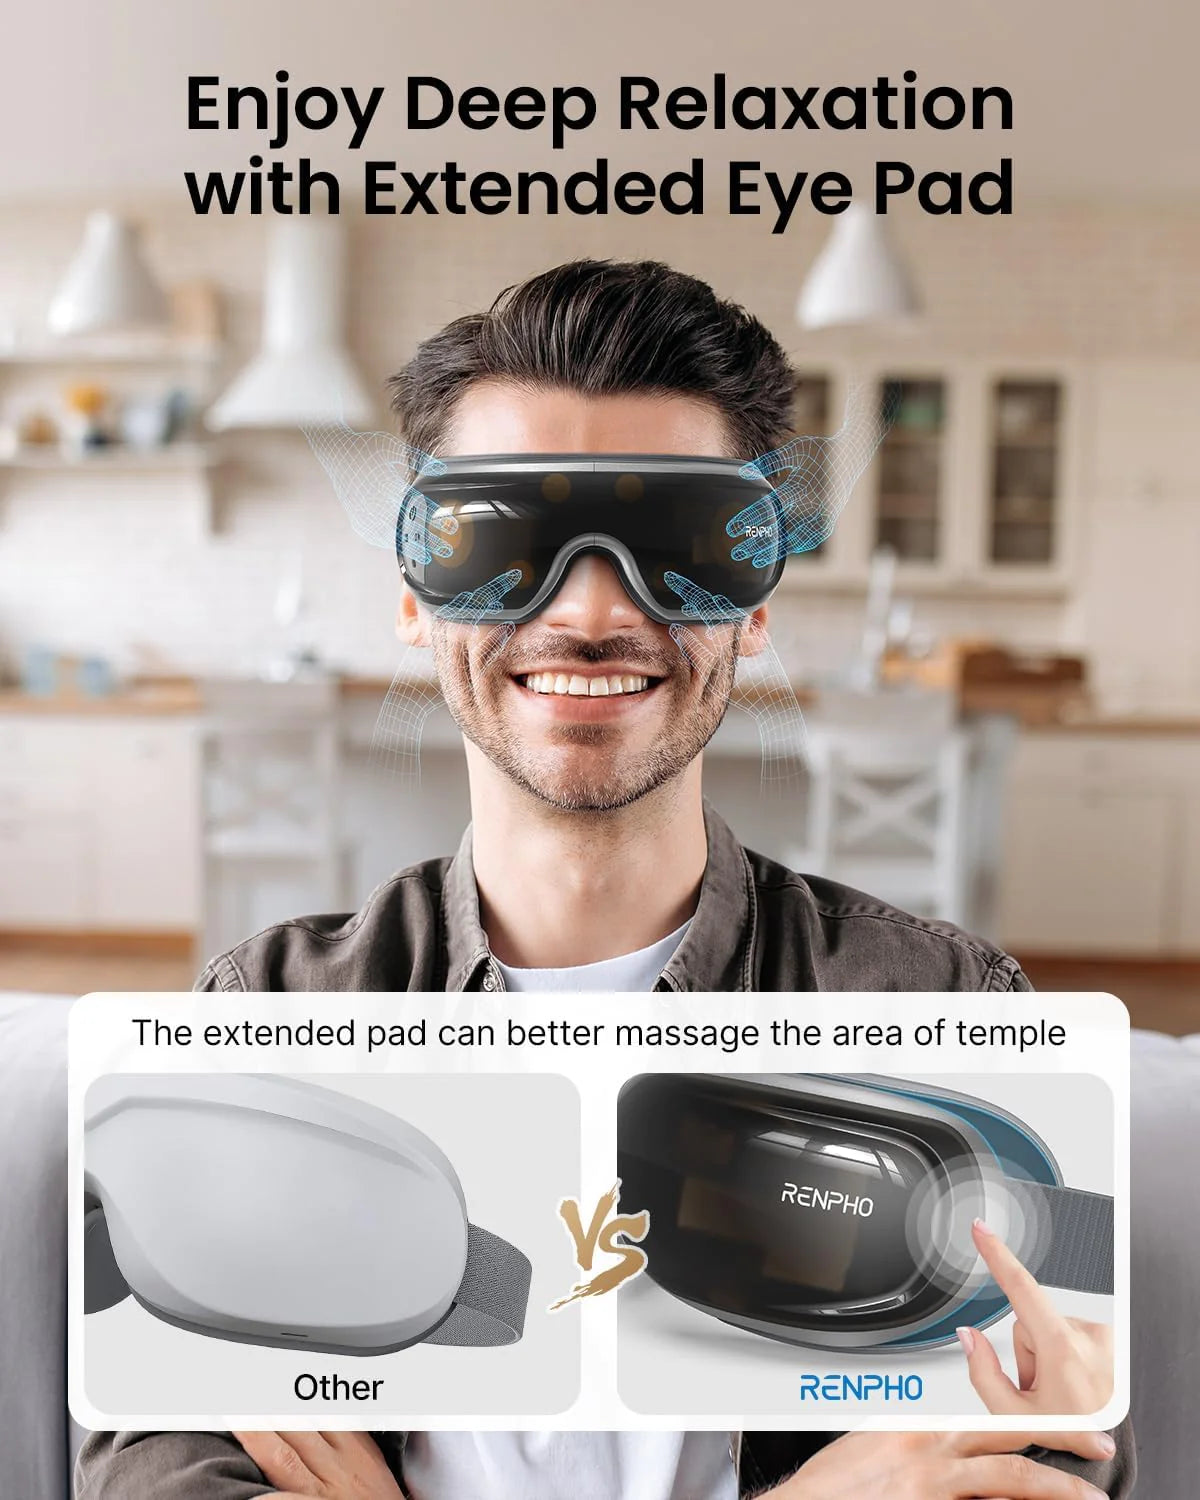 A person wearing a Renpho EU Eyeris 3 Eye Massager with an extended pad is smiling in a cozy kitchen. The image highlights the benefit of the Renpho EU extended eye pad, featuring hands-free control for personalized eye care, as better for massaging temples compared to another smaller pad labeled "Other." The text reads, "Enjoy Deep Relaxation with Extended Eye Pad.